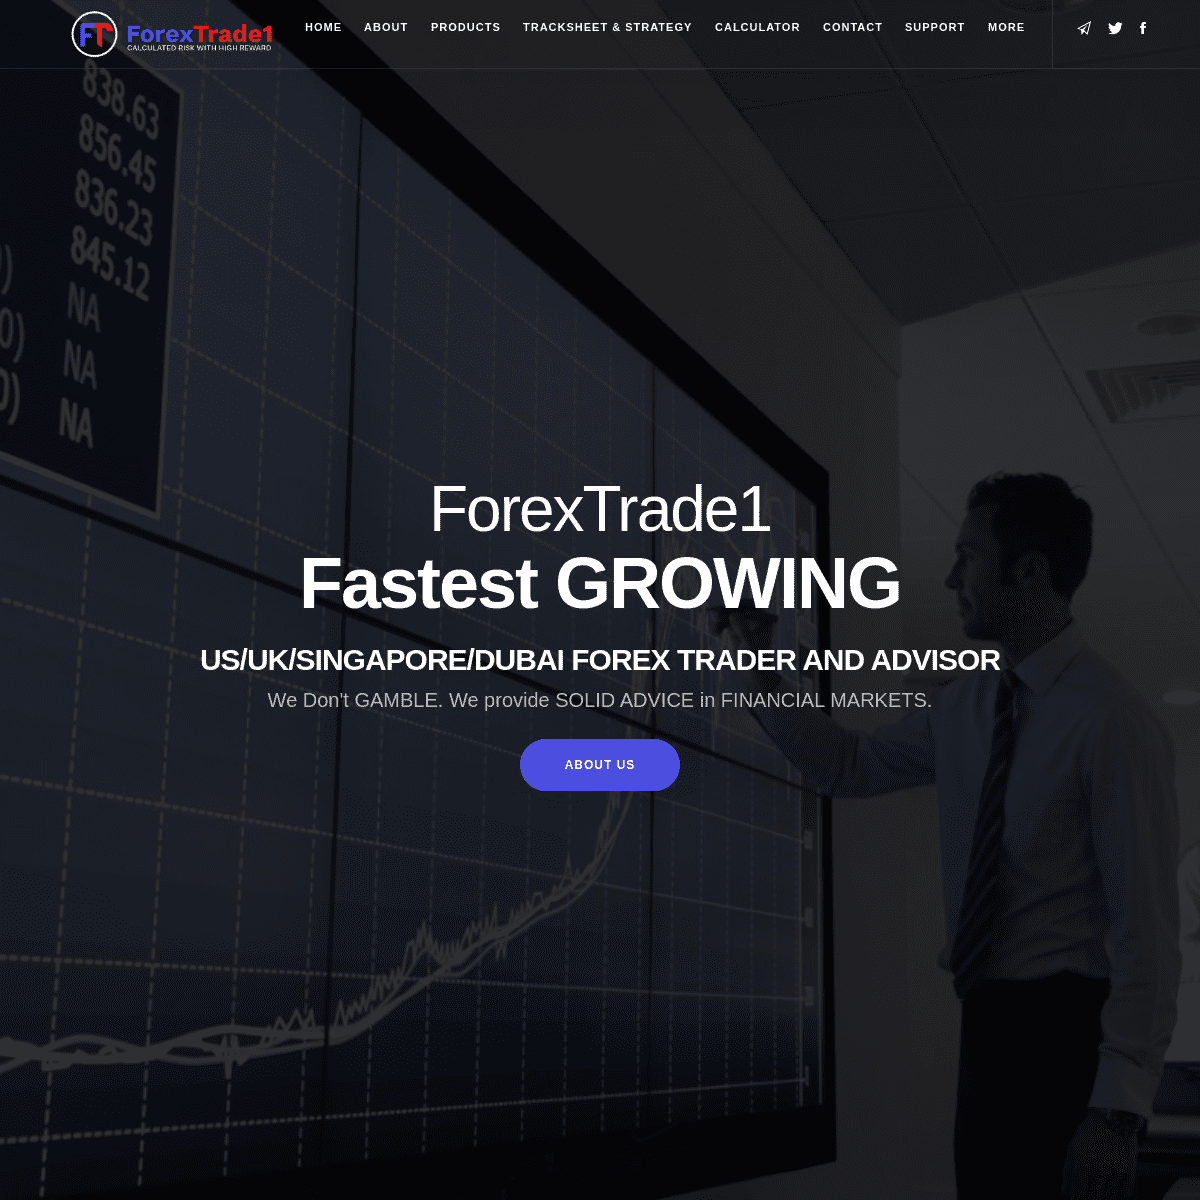 A complete backup of forextrade1.com